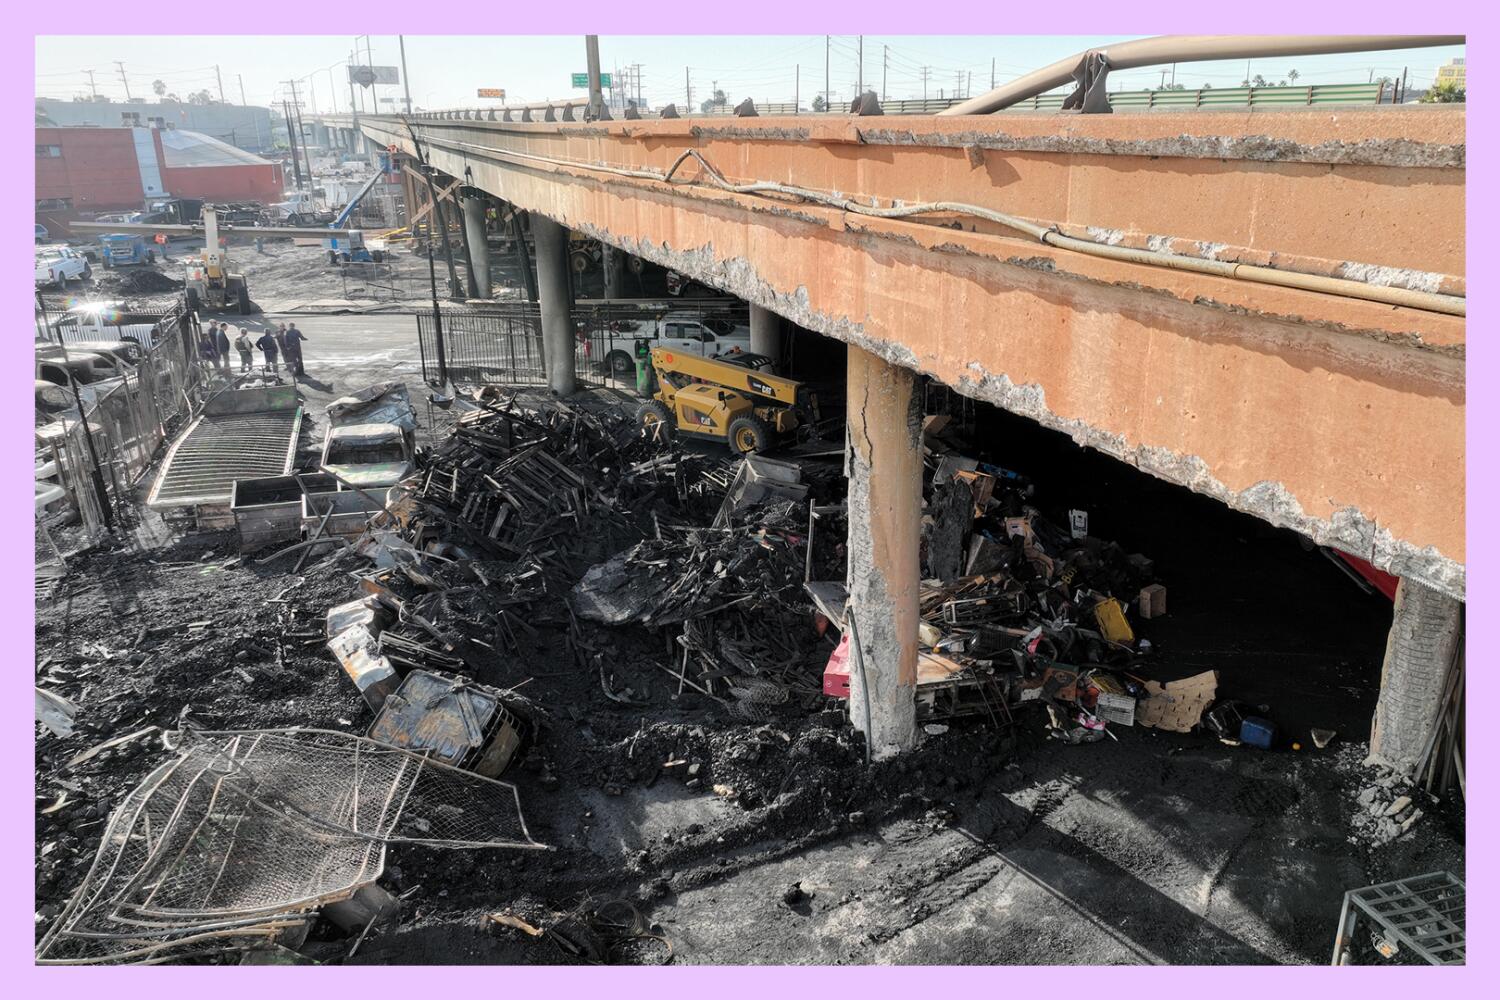 After I-10 fire, Caltrans finds more hazards under freeways, recommends revamp of leases